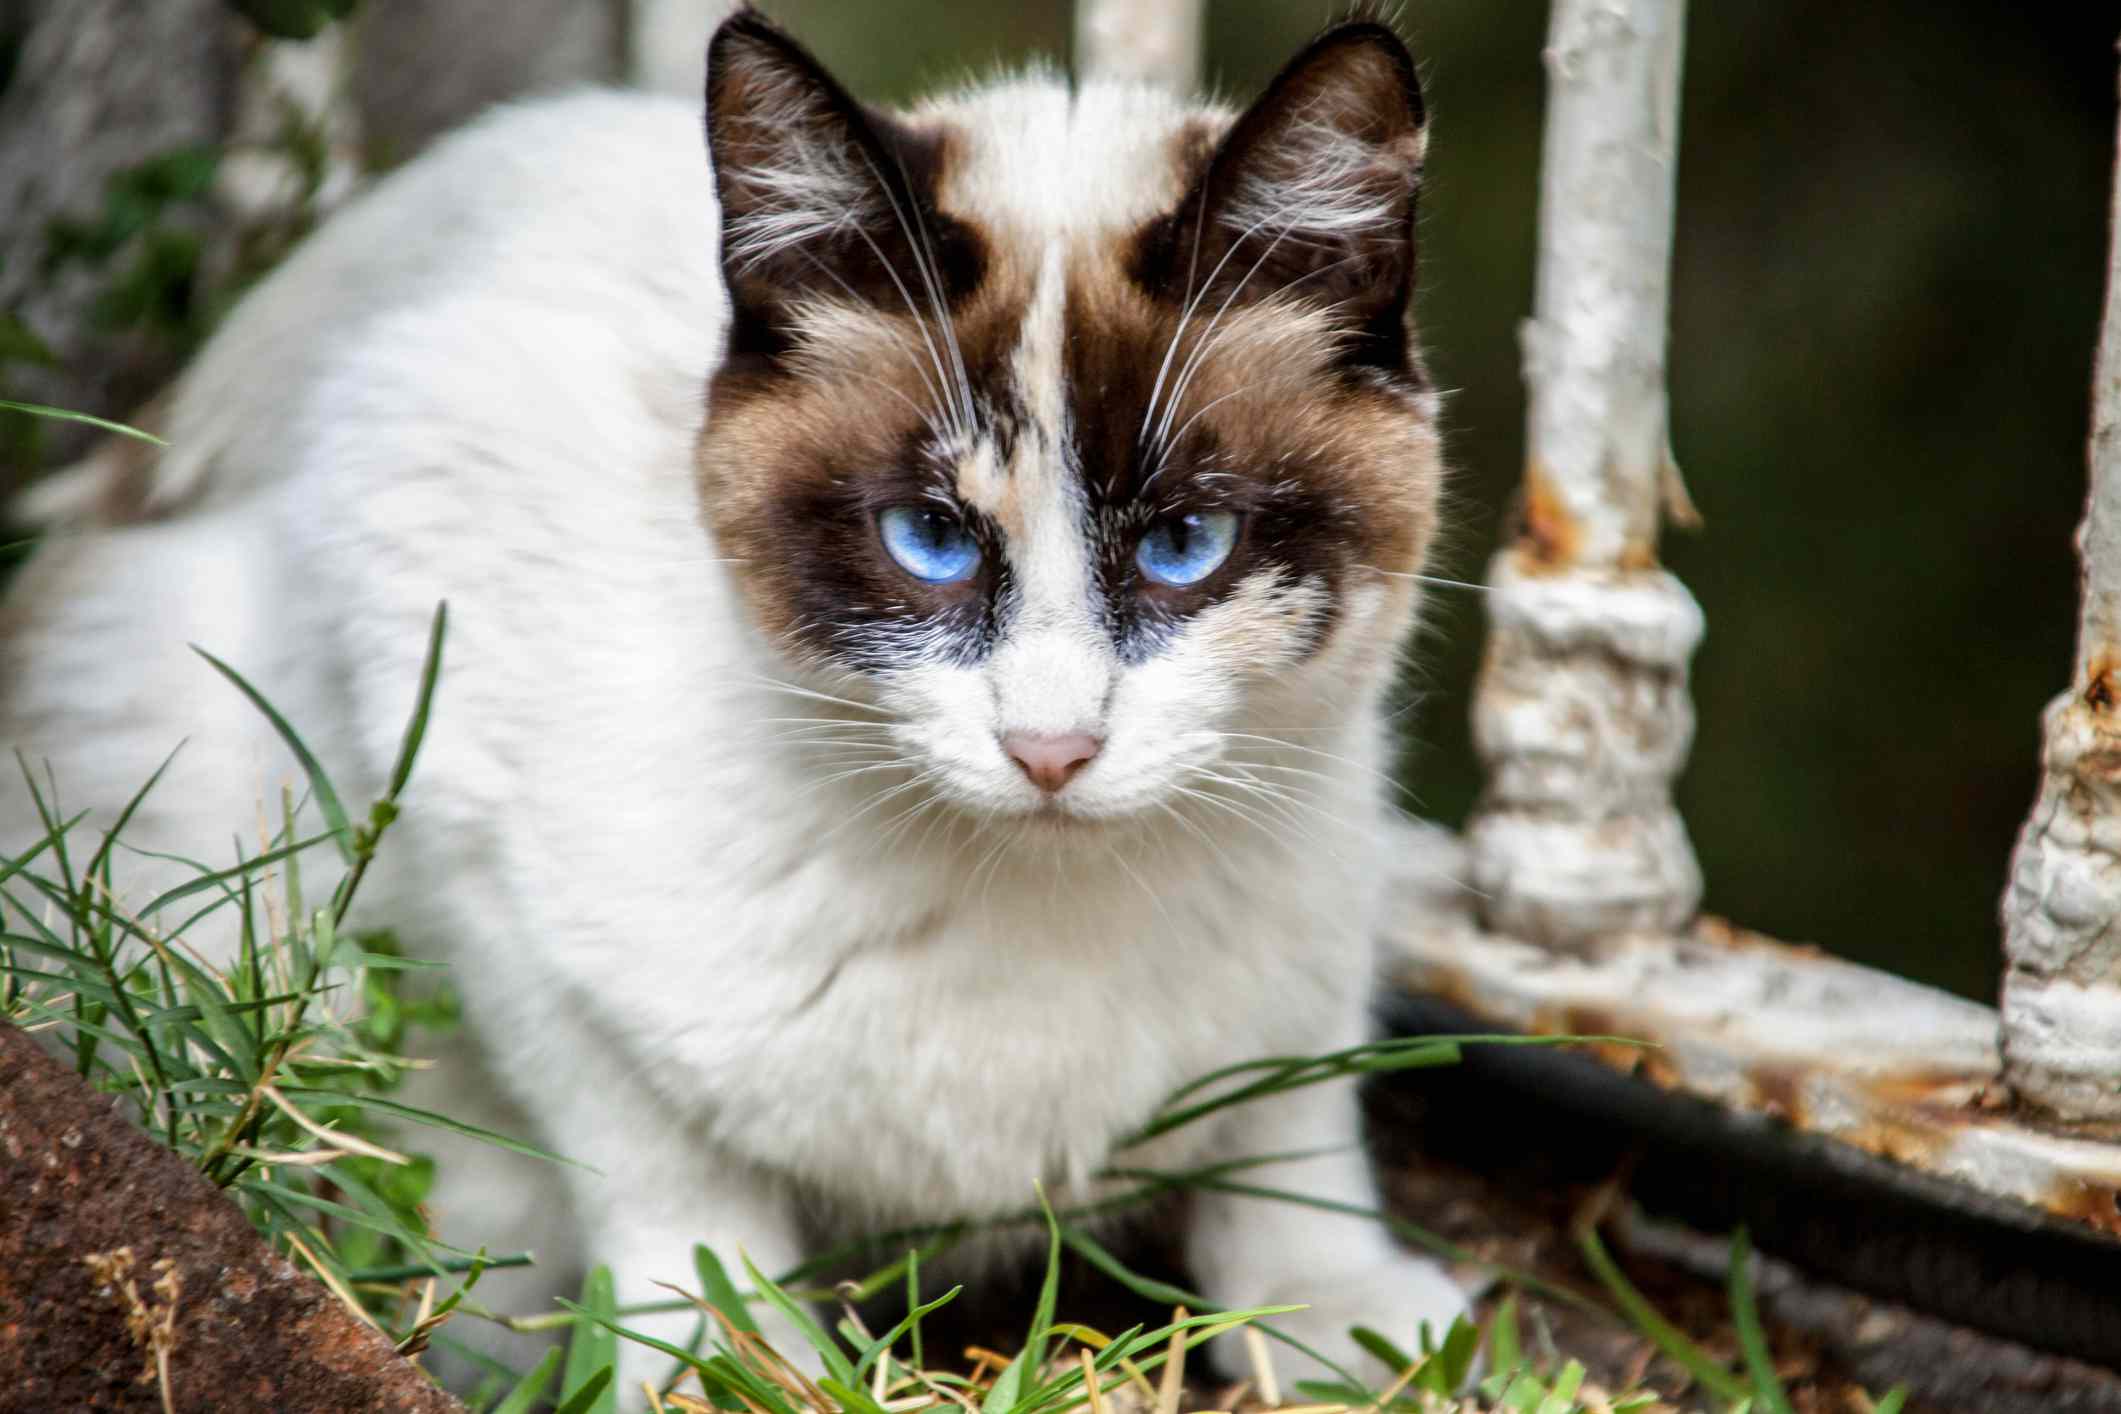 Blue eyed snow show cat in a garden in front of a fence